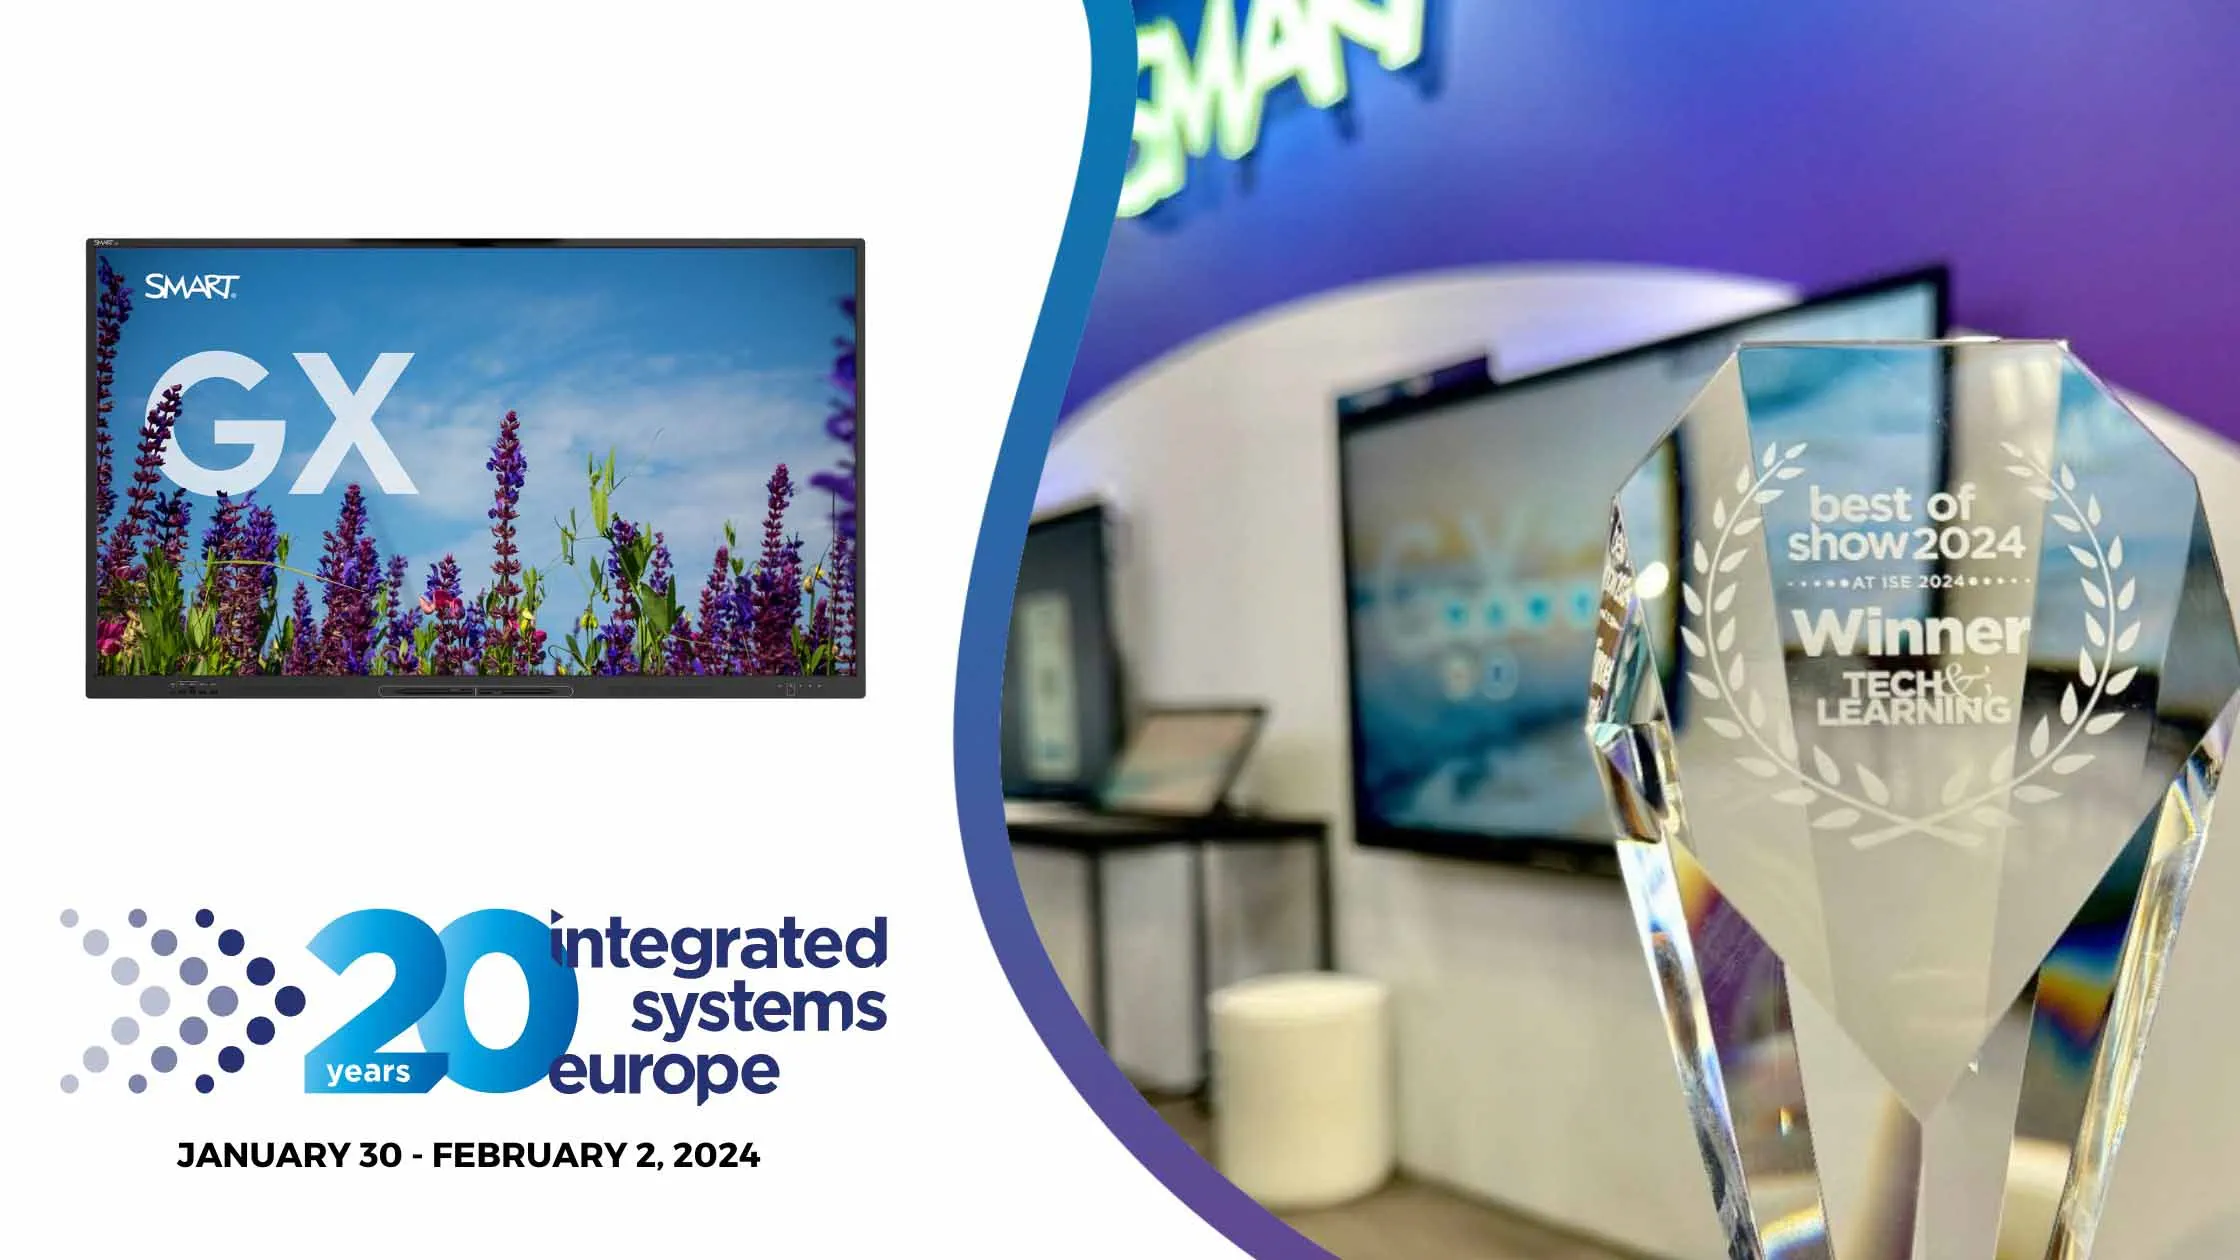 SMART Board GX-V3 is Awarded-Best-of-Show at ISE 2024